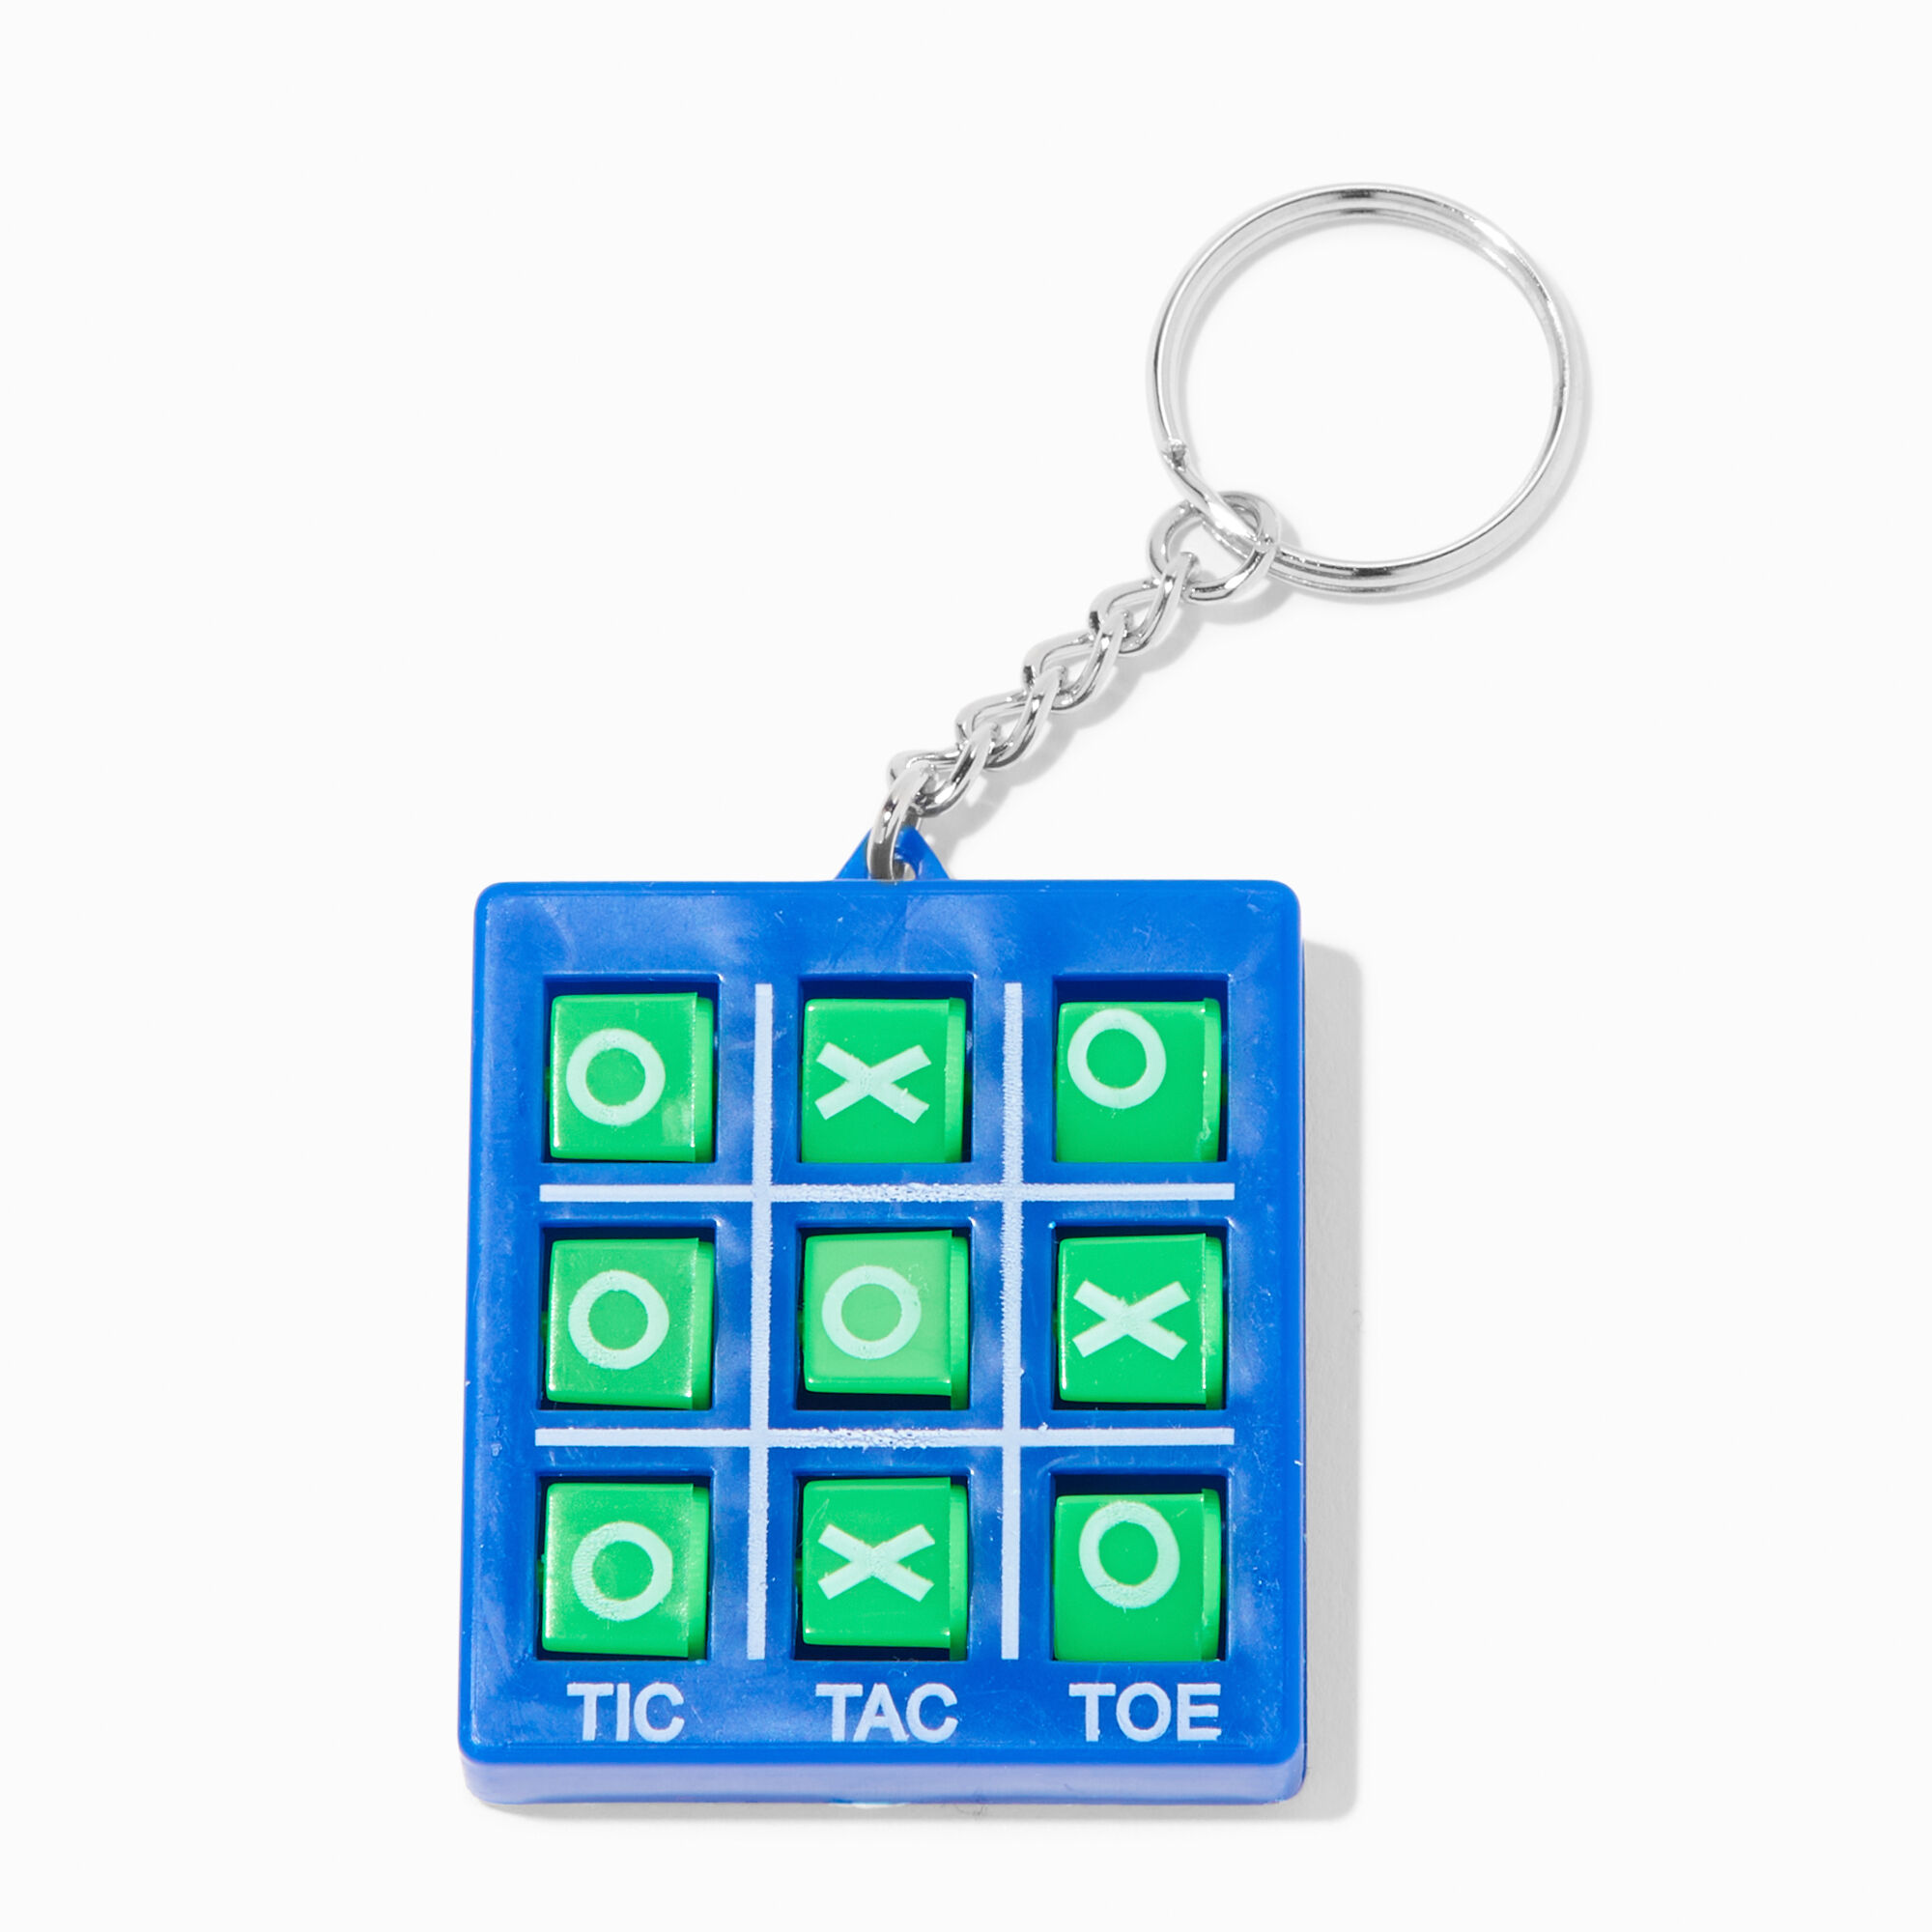 View Claires Tic Tac Toe Game Keyring information